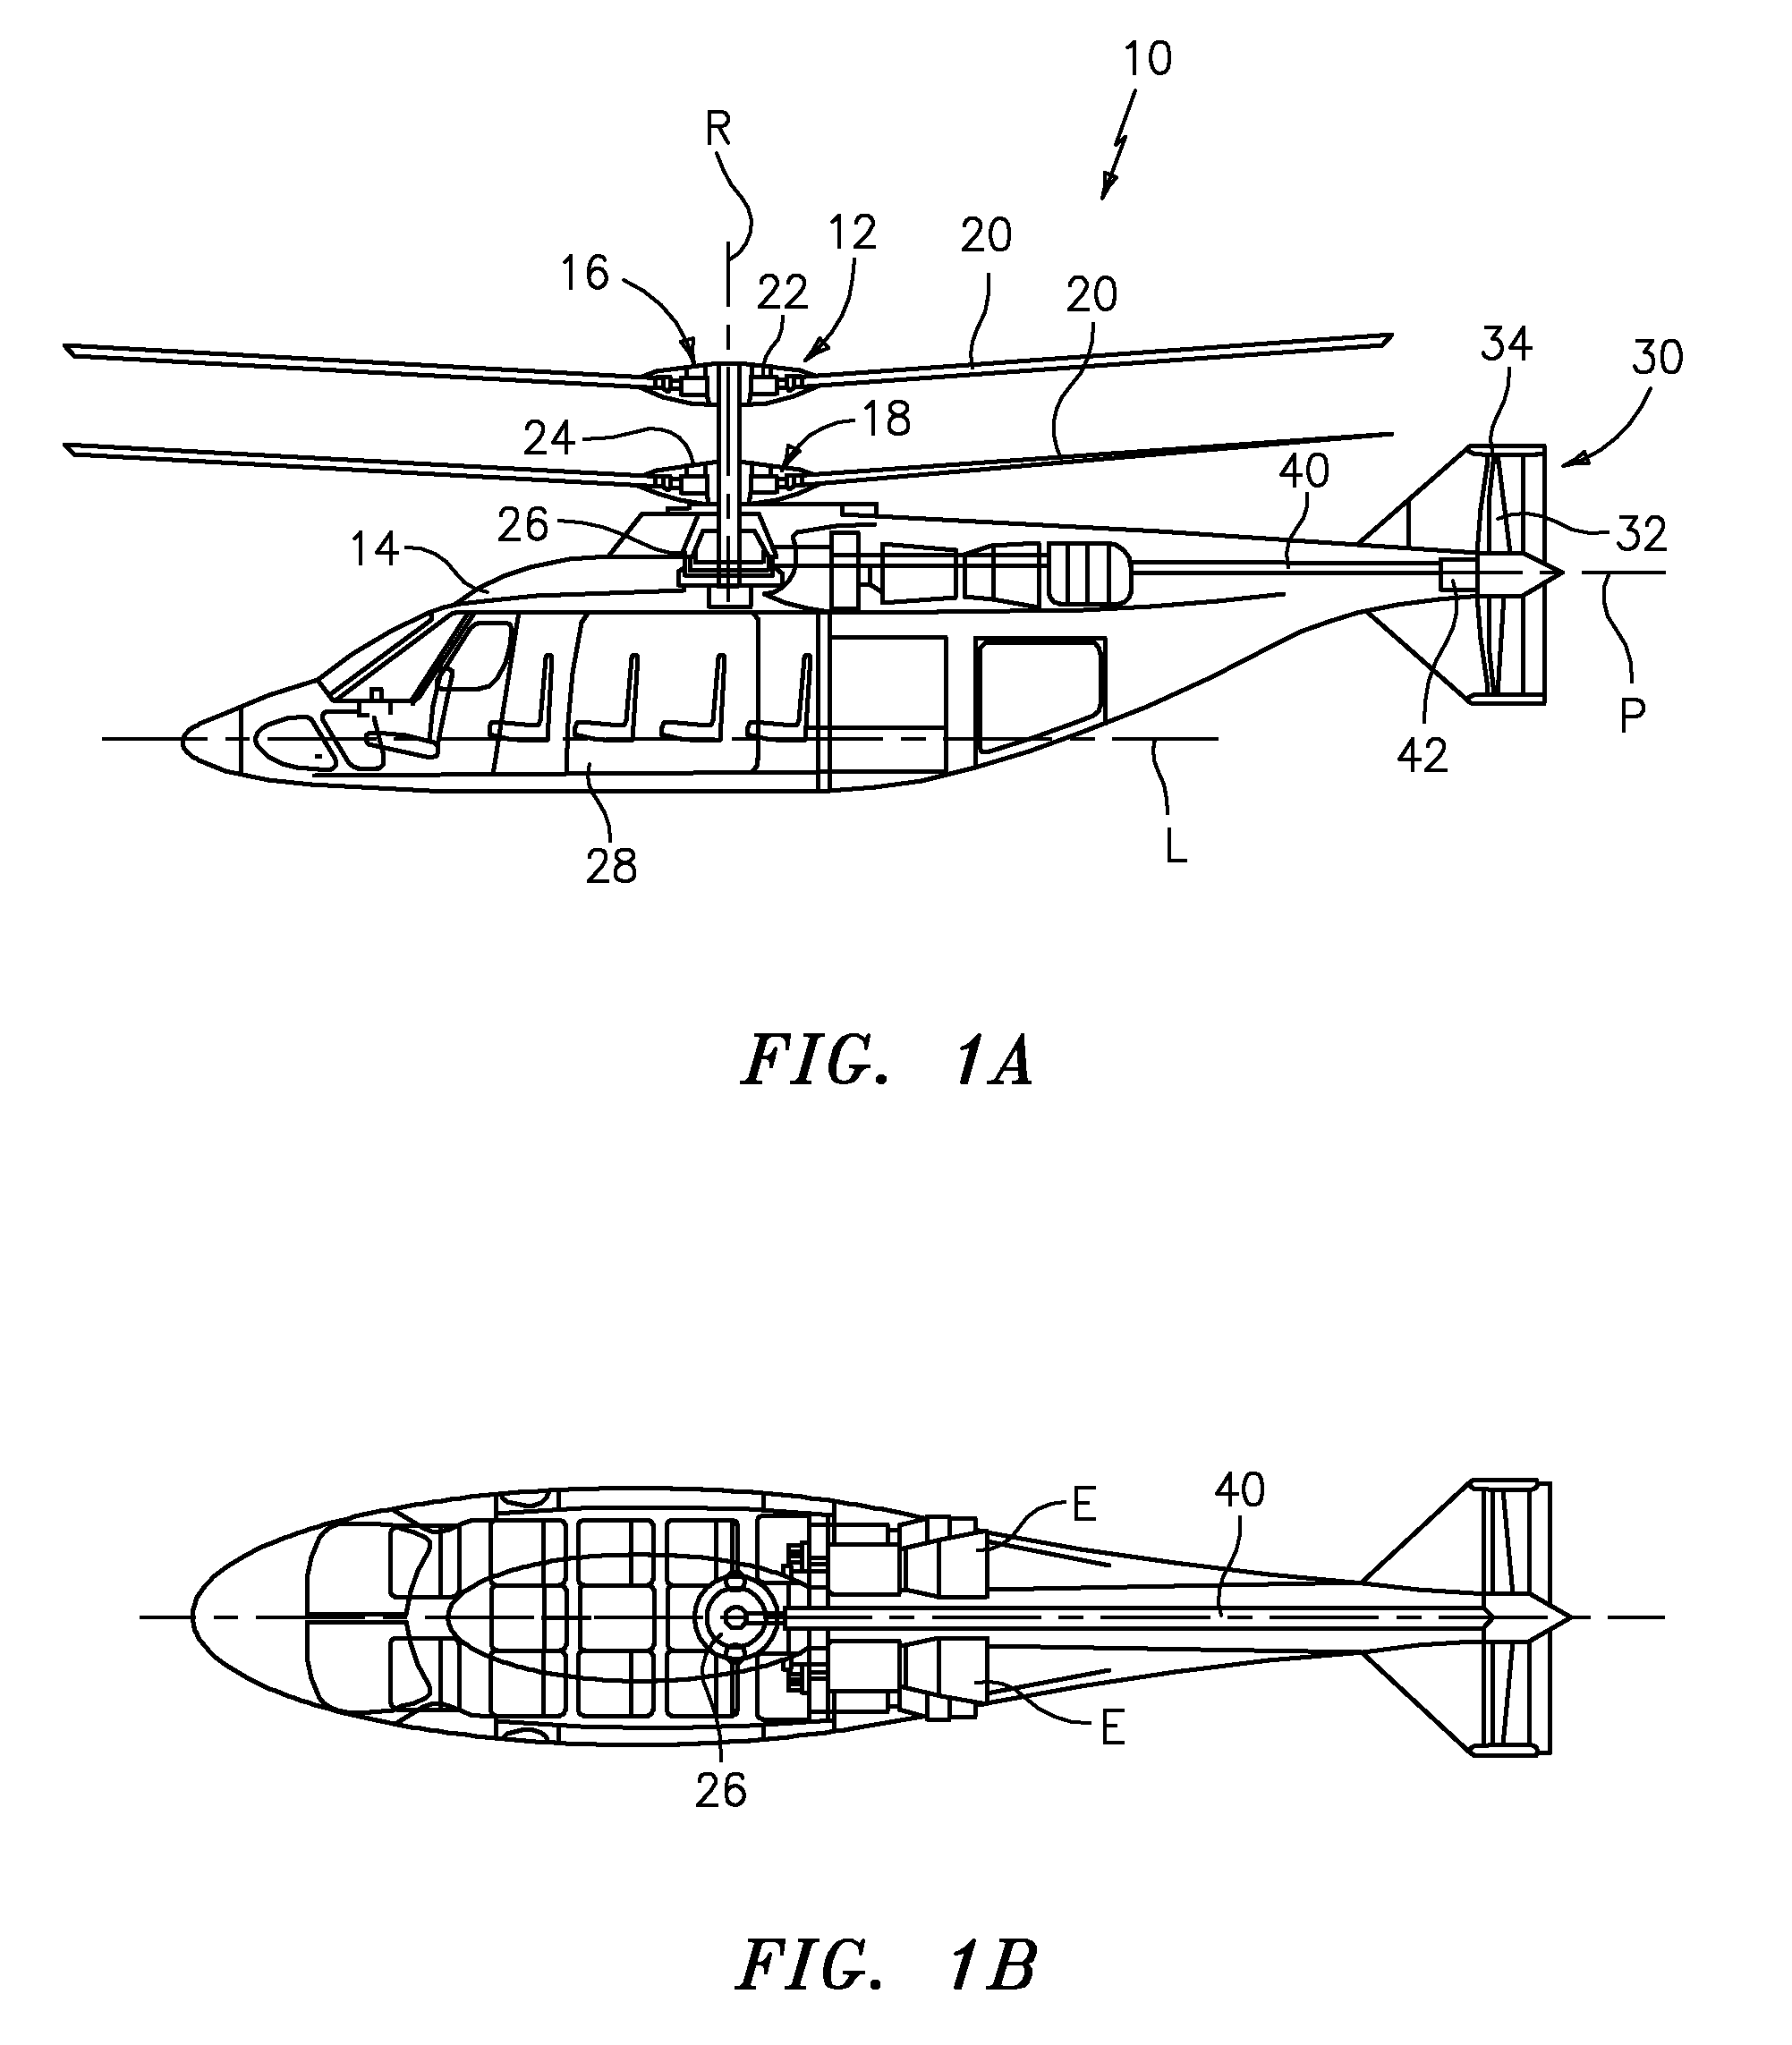 Translational thrust system for a rotary wing aircraft